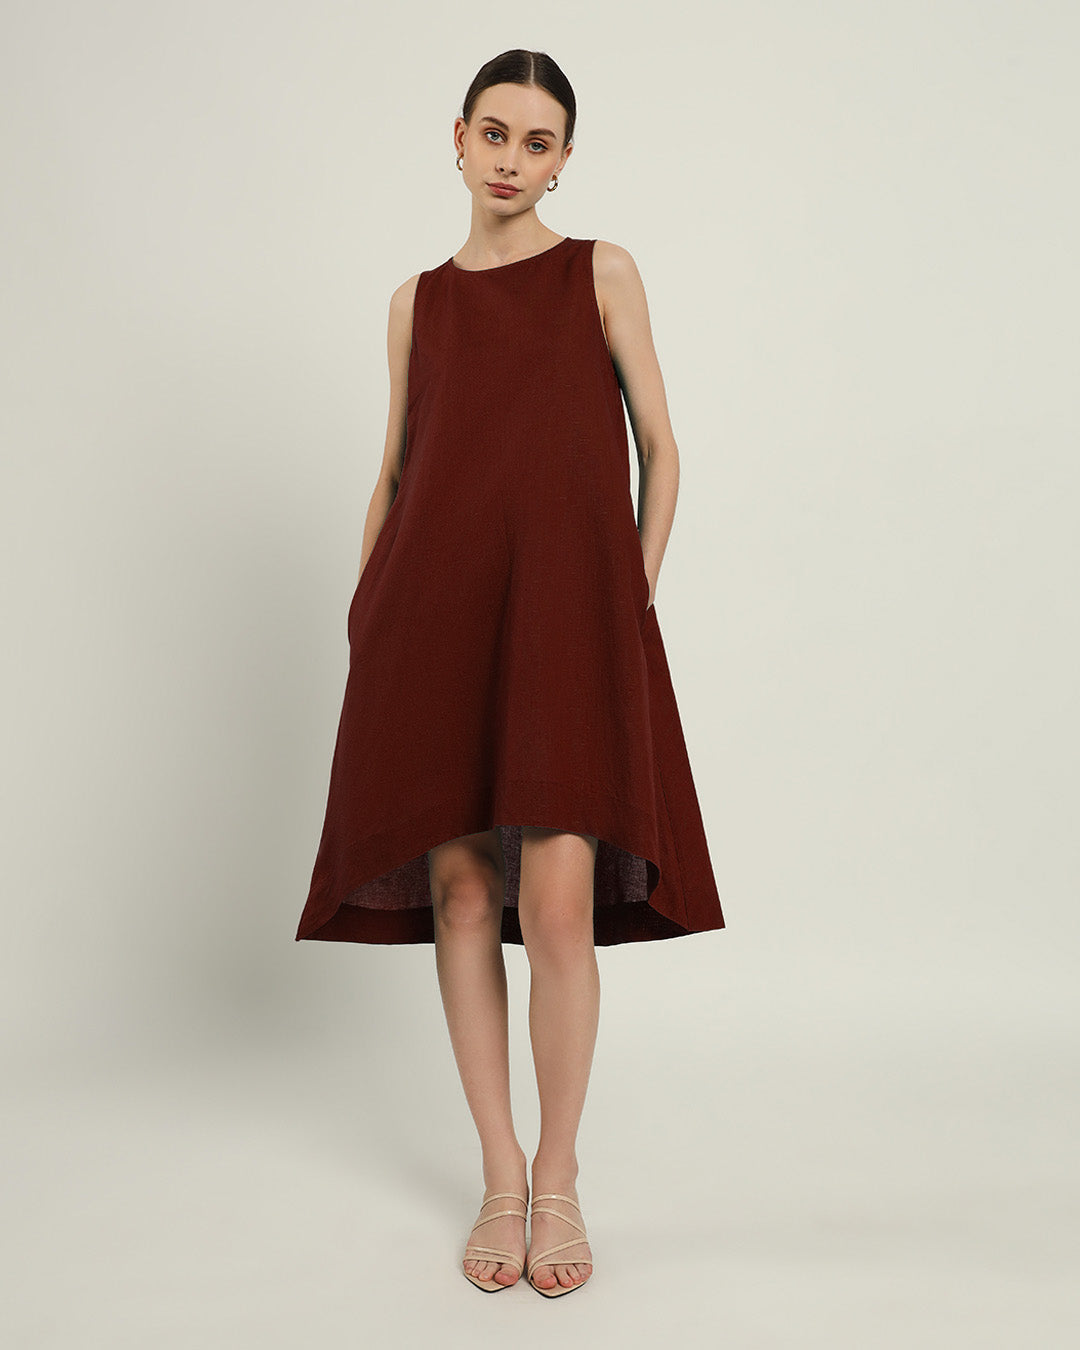 The Odesa Rouge Cotton Dress